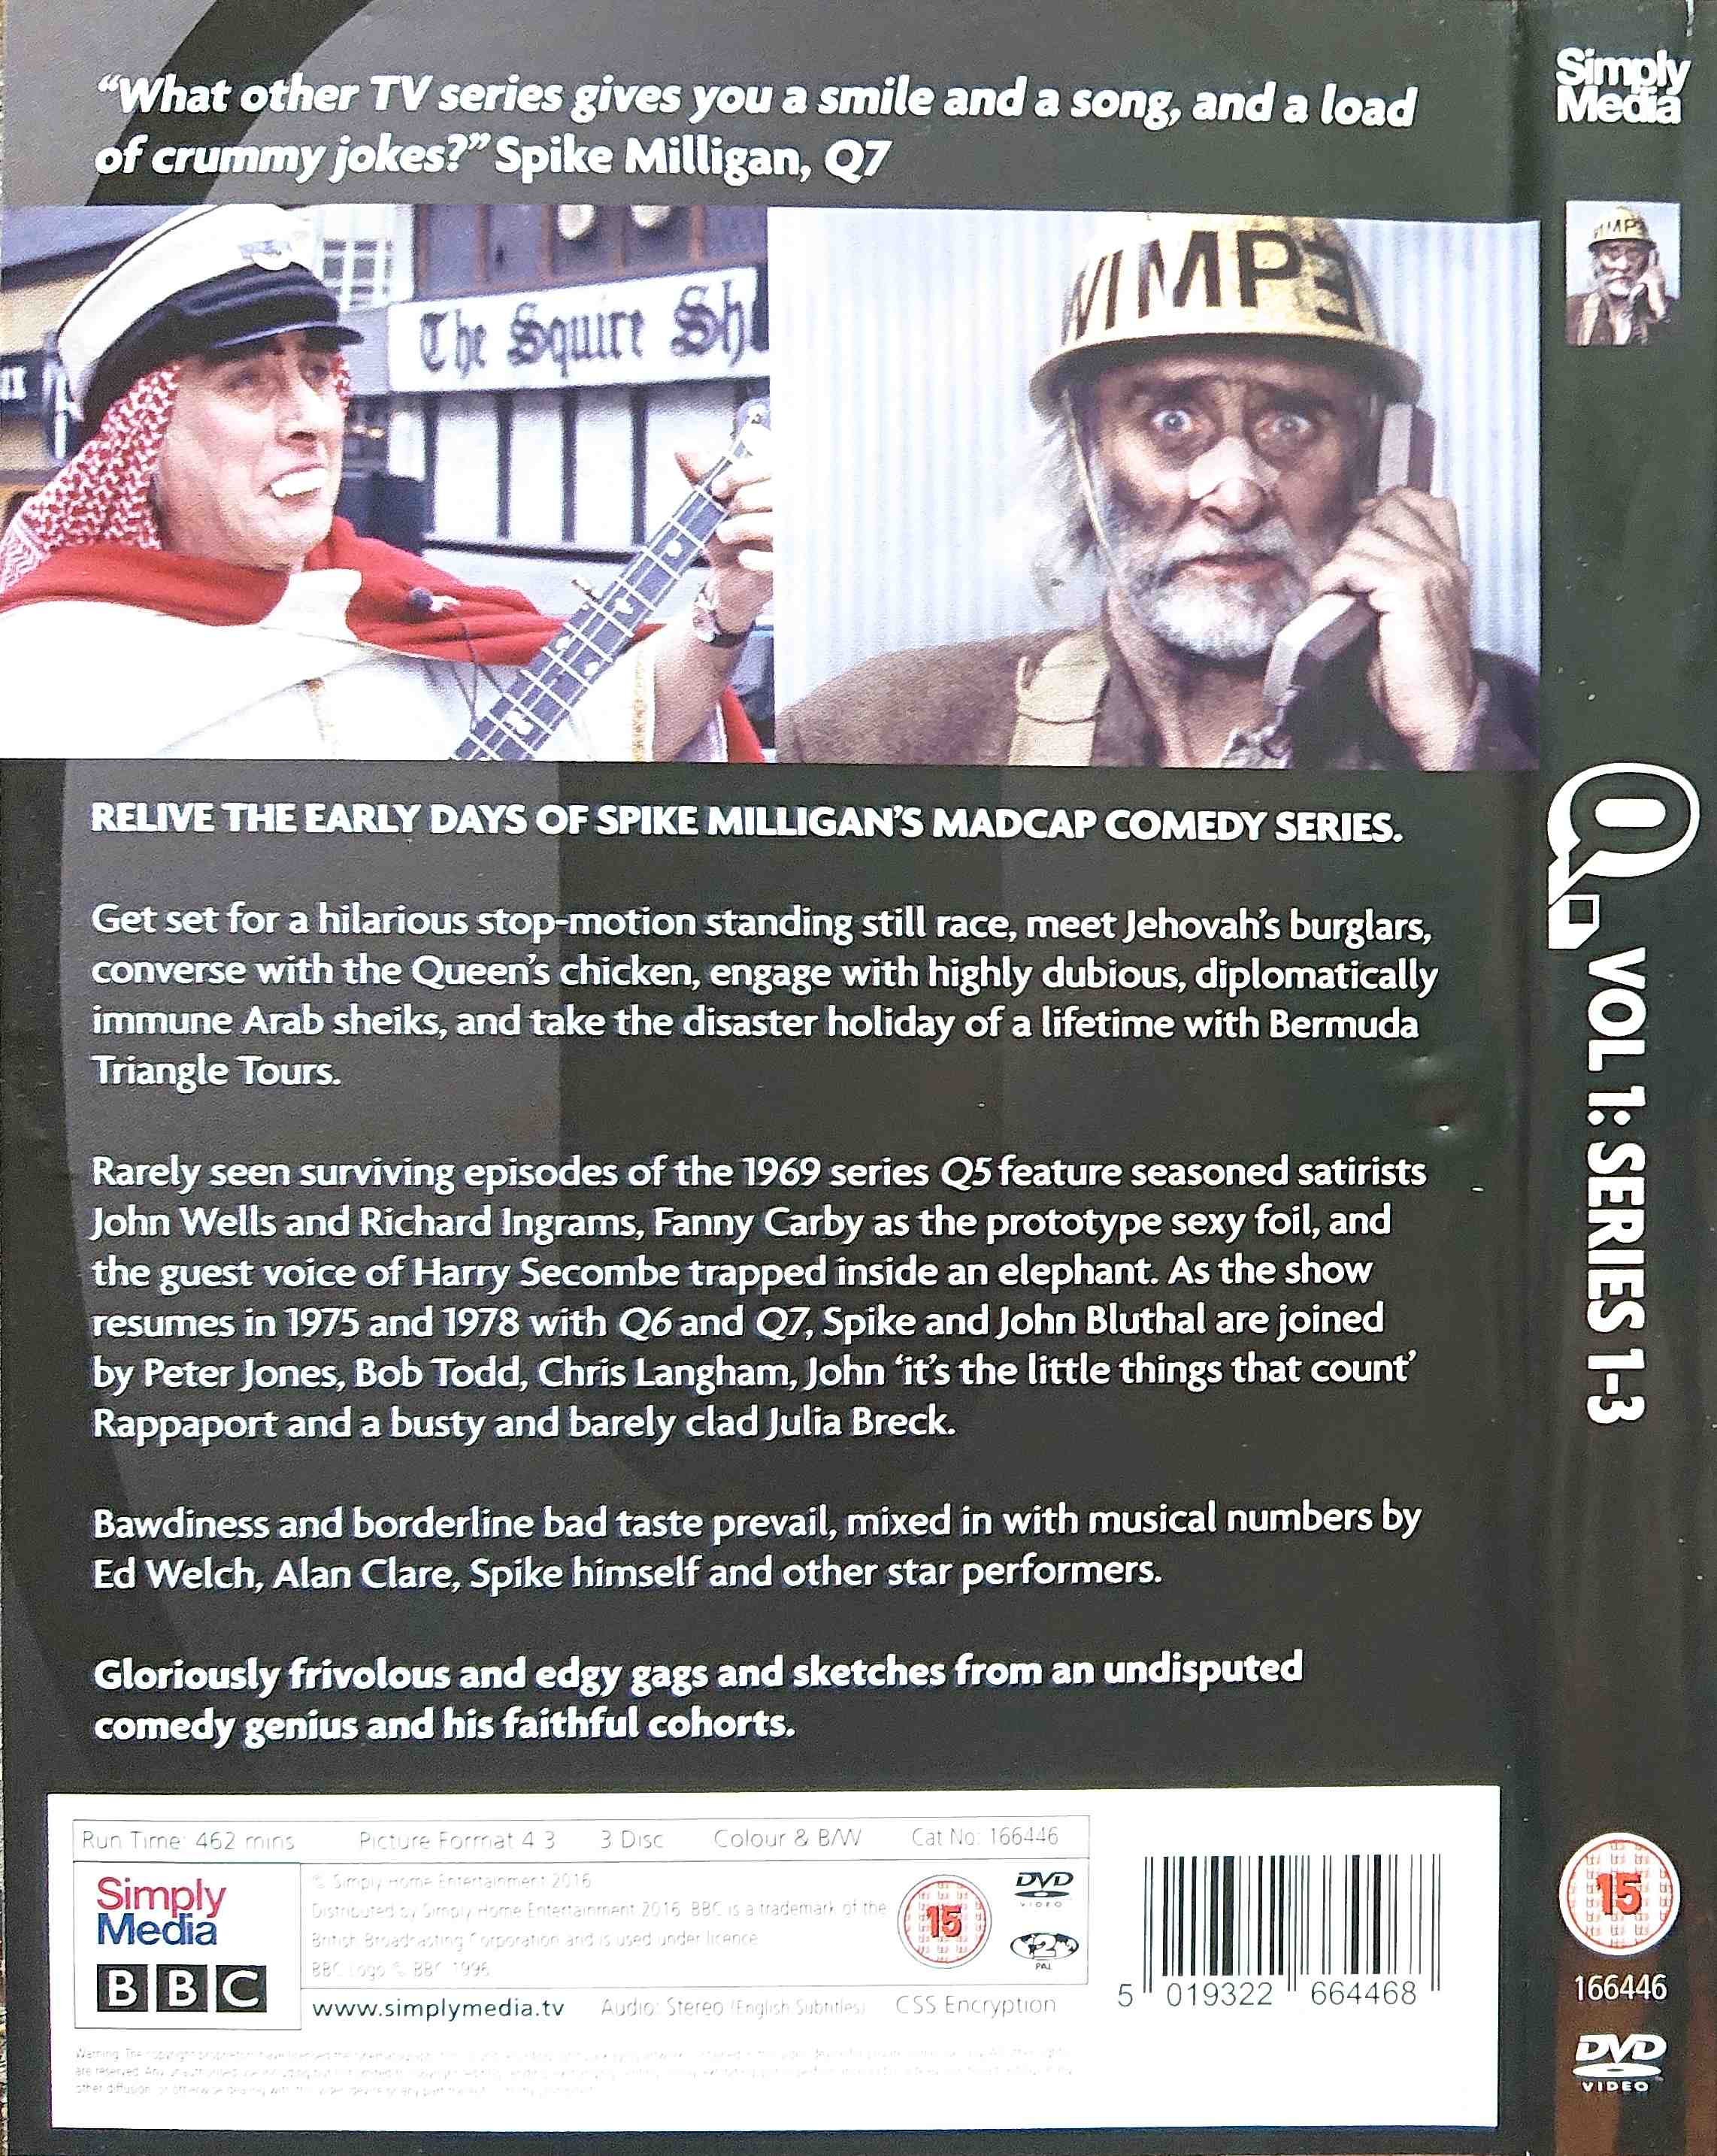 Picture of 166446 Q. - Volume 1: Series 1-3 by artist Spike Milligan from the BBC records and Tapes library